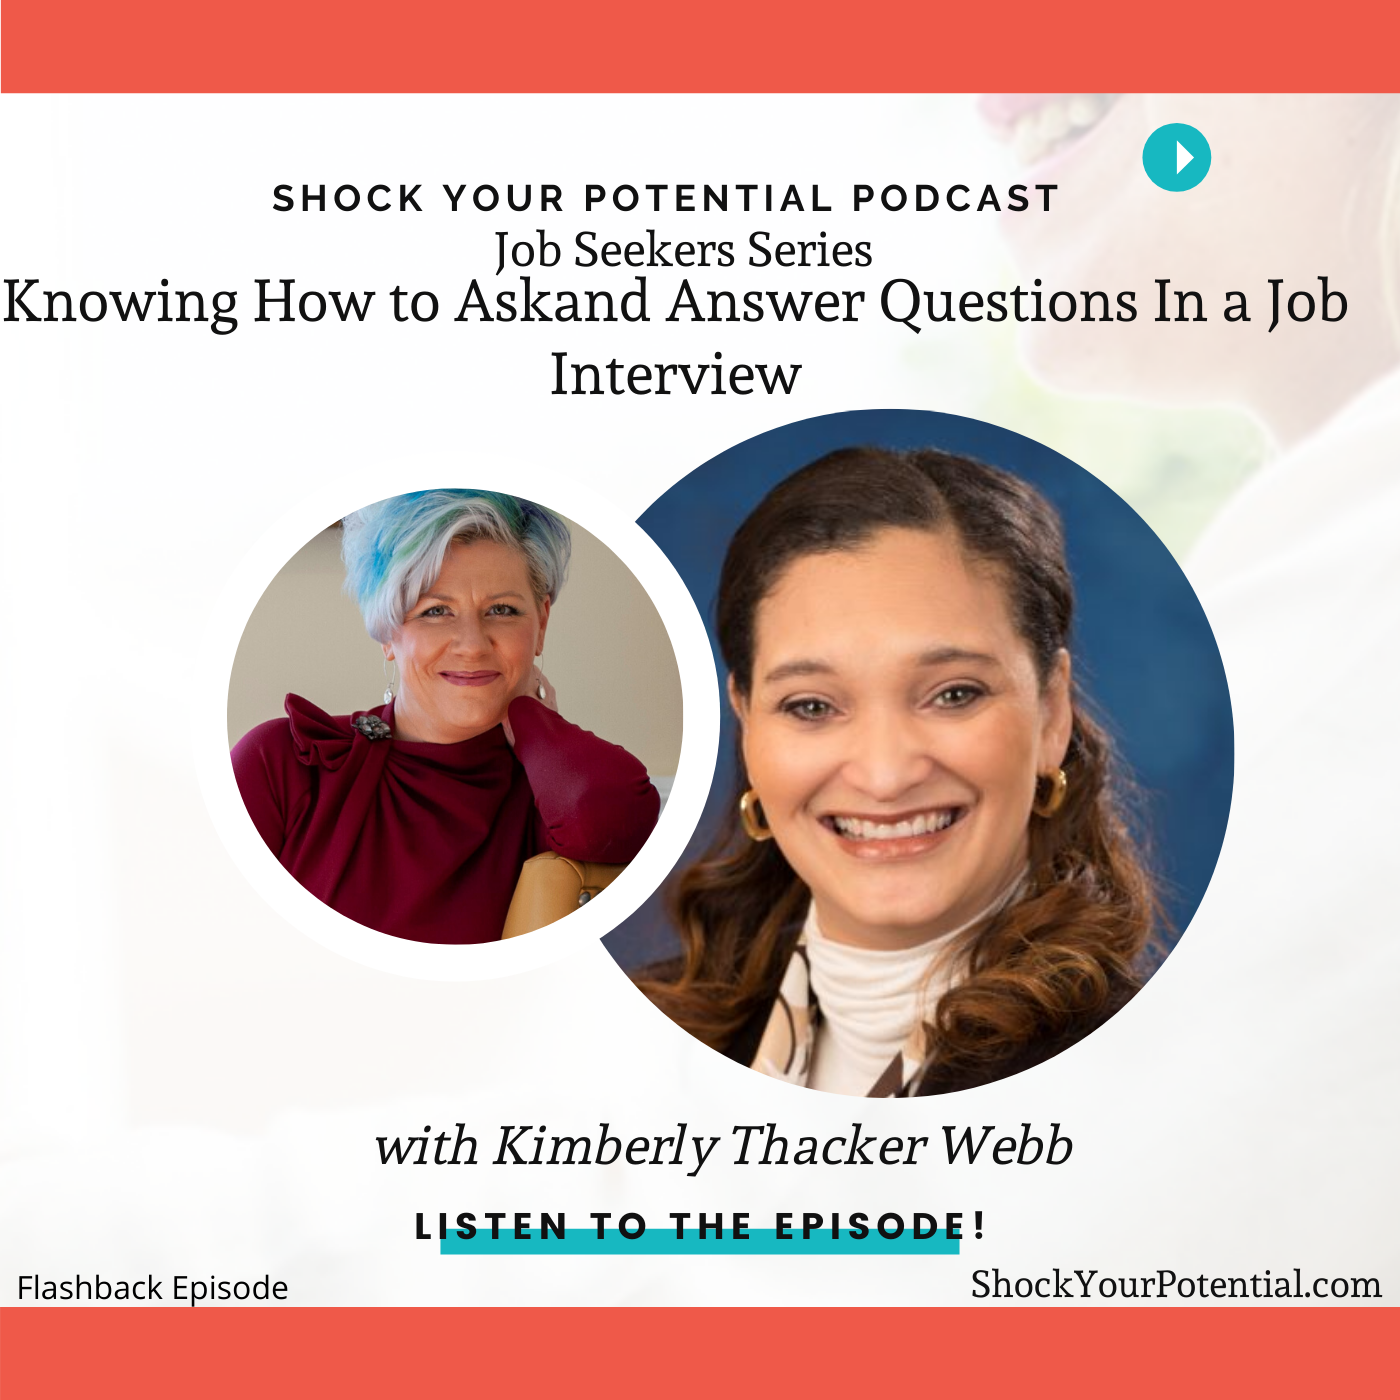 Knowing How to Ask and Answer Questions In a Job Interview – Kimberly Thacker Webb